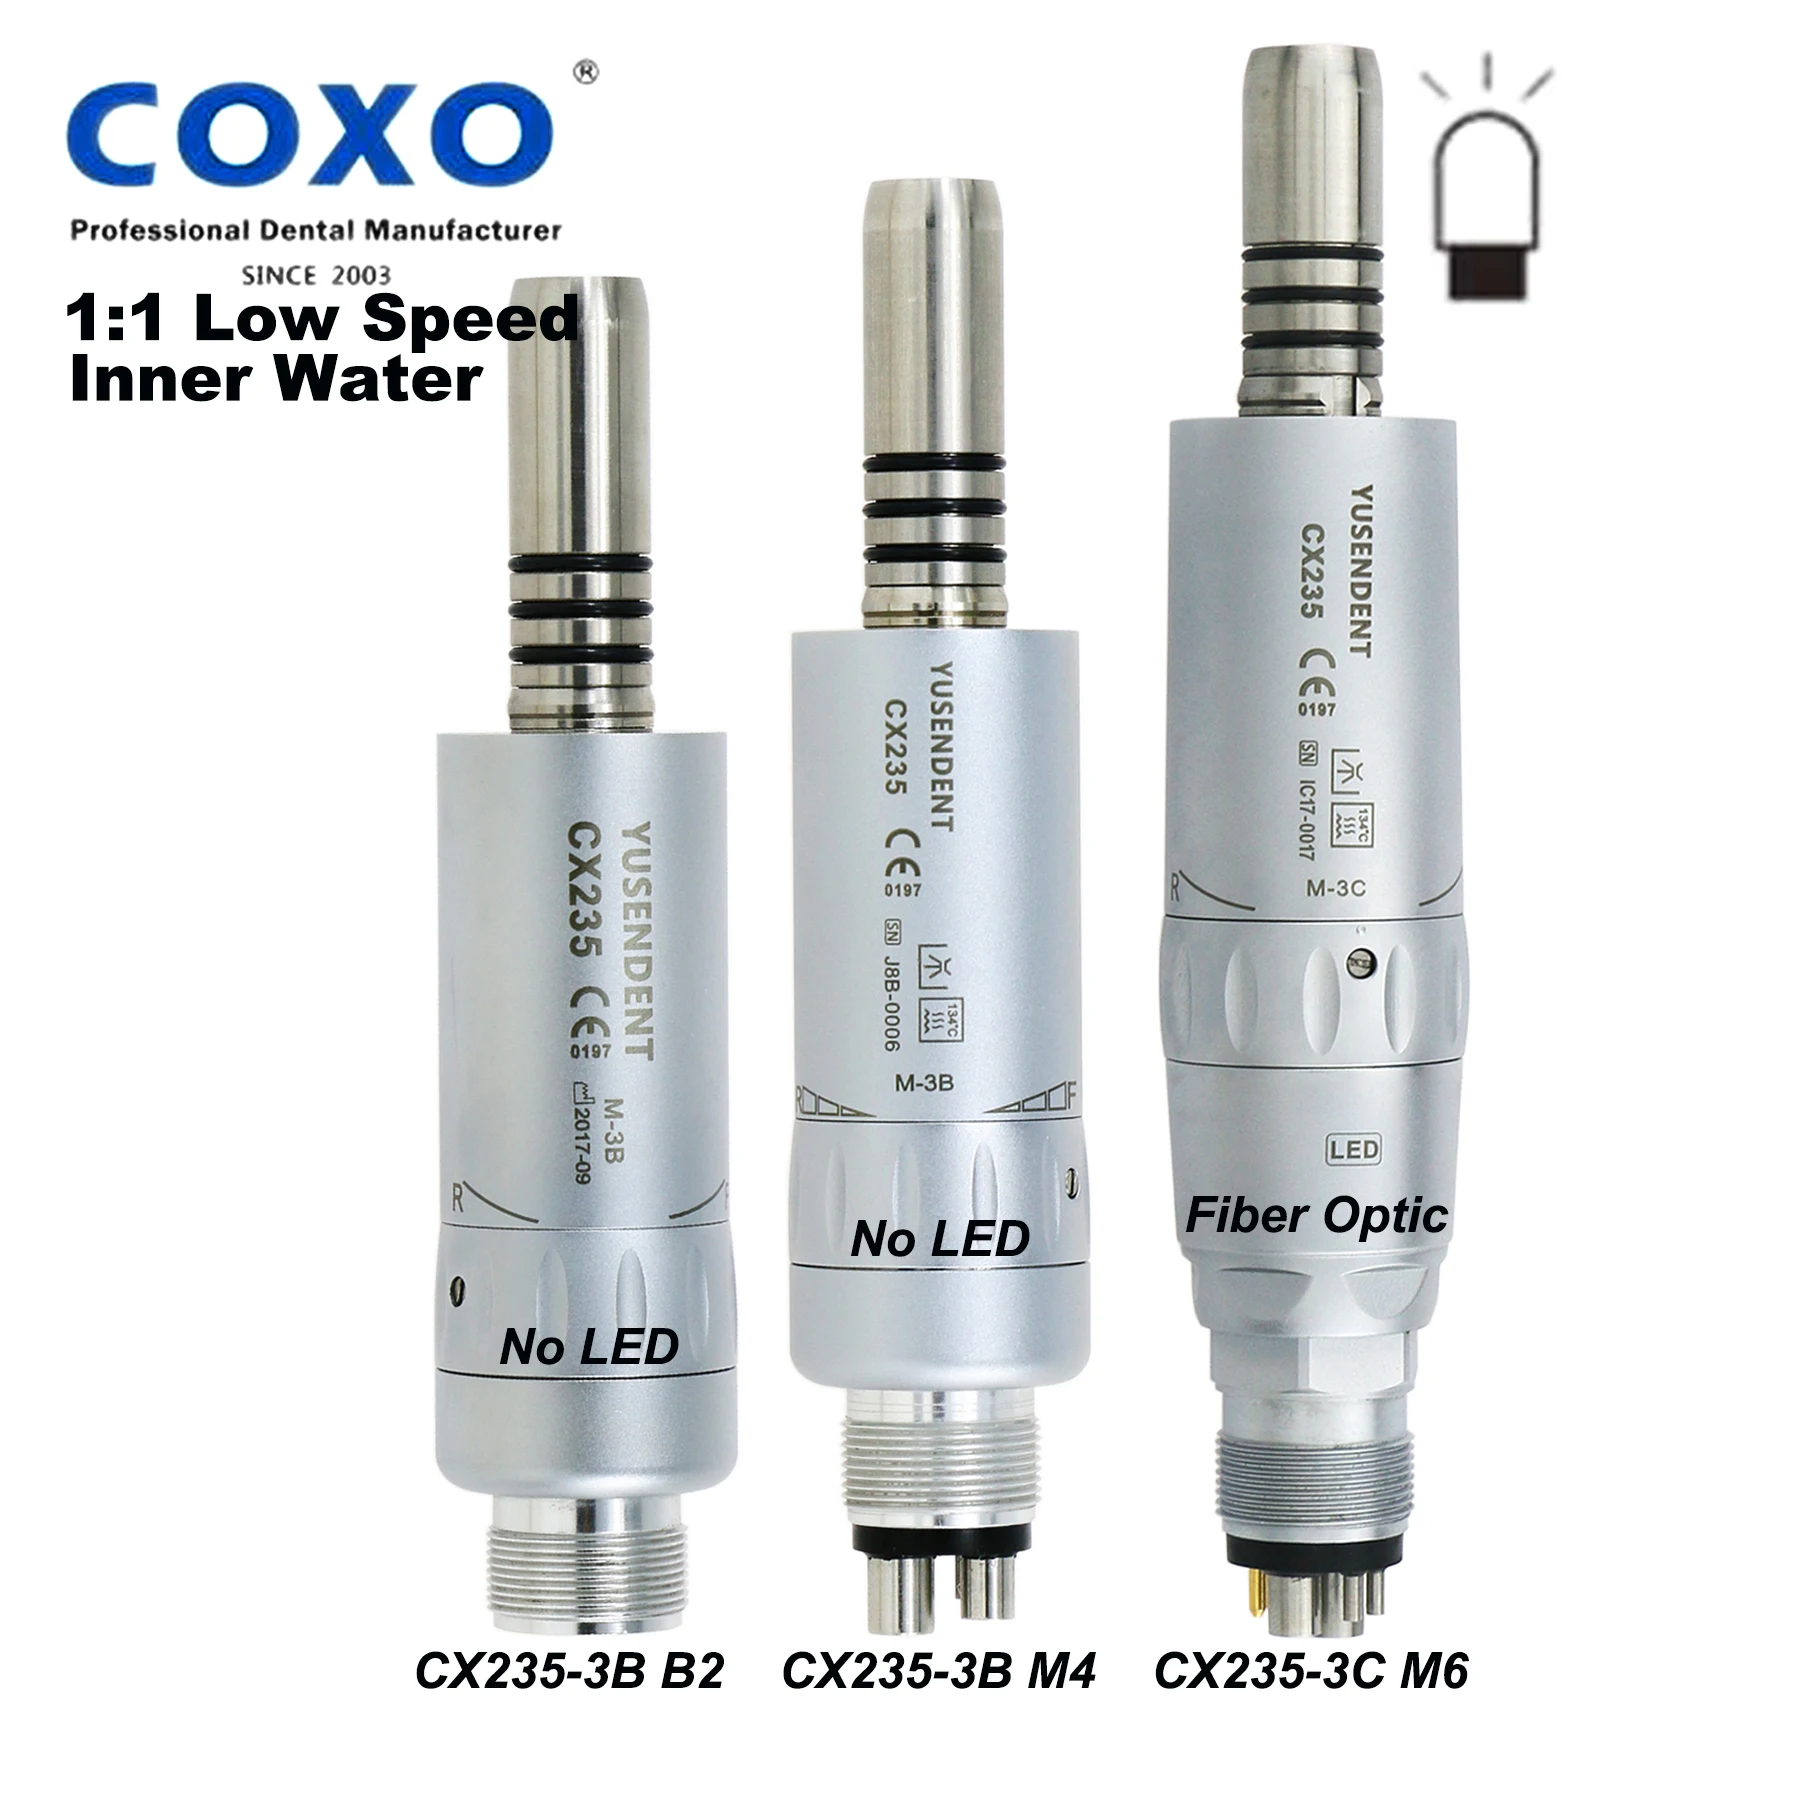 COXO YUSENDENT Dental 1:1 Inner Water Low Speed LED Fiber Optic Air Motor Handpiece 2 4 6 Hole Fit For ISO E type NSK KAVO